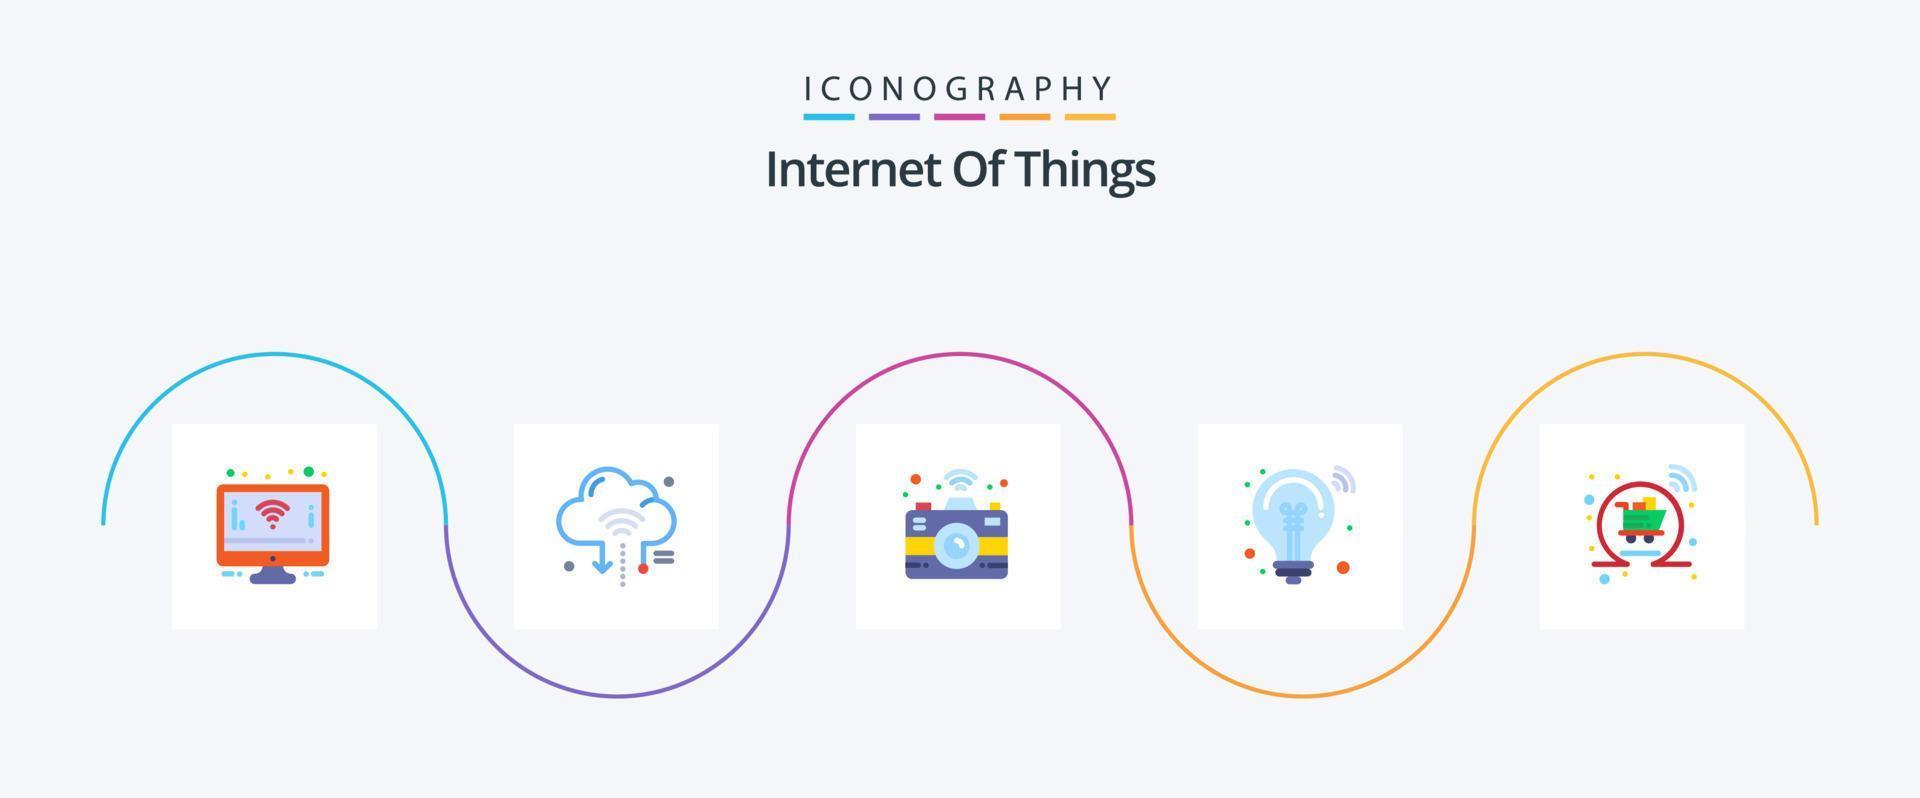 Internet Of Things Flat 5 Icon Pack Including online. basket. camera. smart solution. idea vector